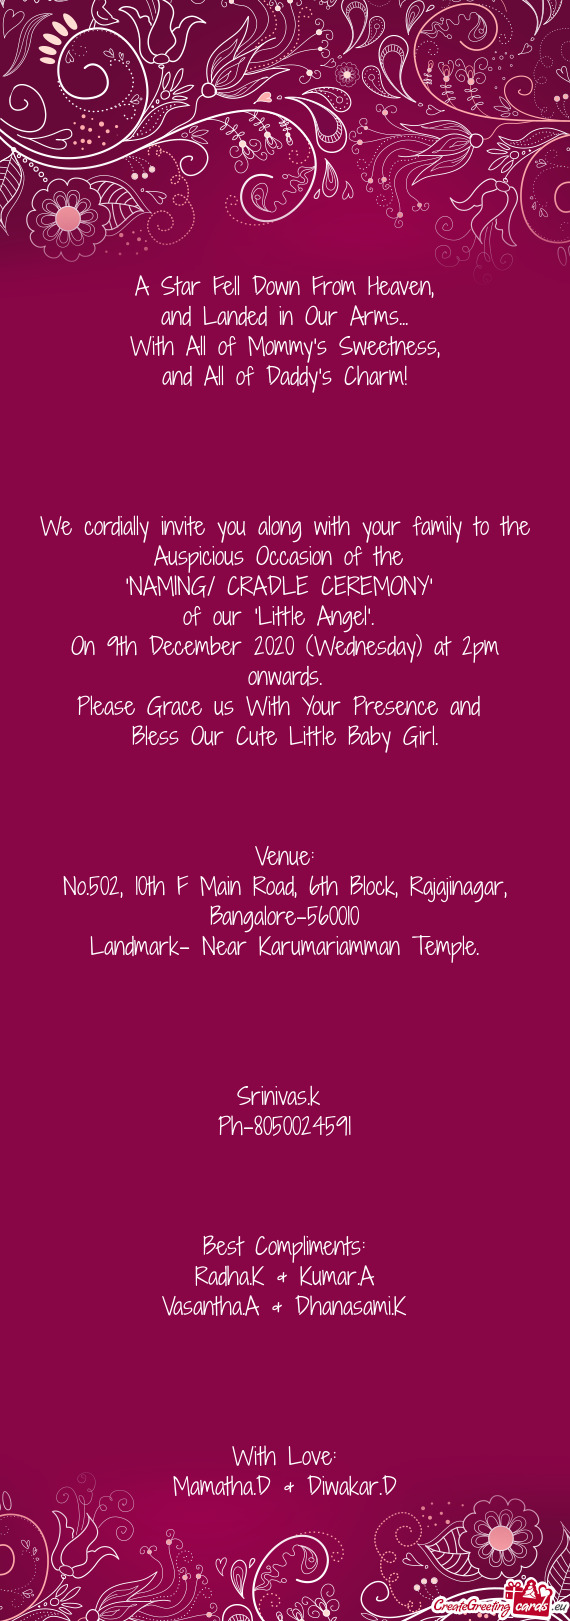 On 9th December 2020 (Wednesday) at 2pm onwards